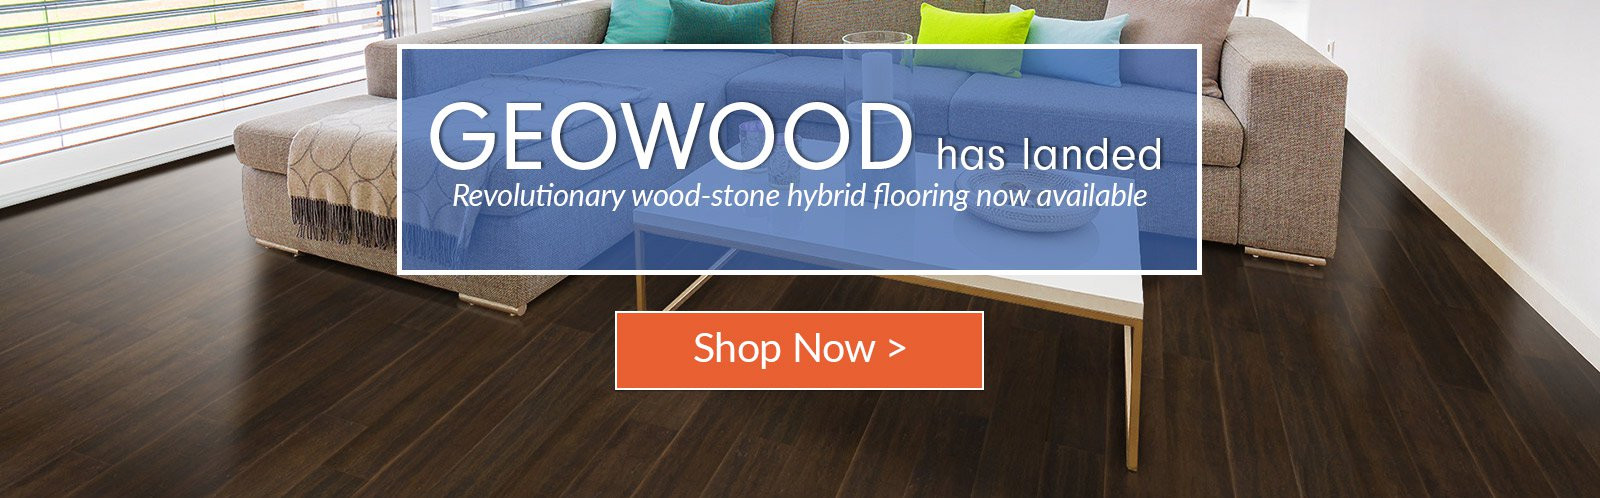 10 Fabulous Yd Hardwood Floors Usa Inc Philadelphia Pa 2024 free download yd hardwood floors usa inc philadelphia pa of green building construction materials and home decor cali bamboo in geowood launch homepage slider